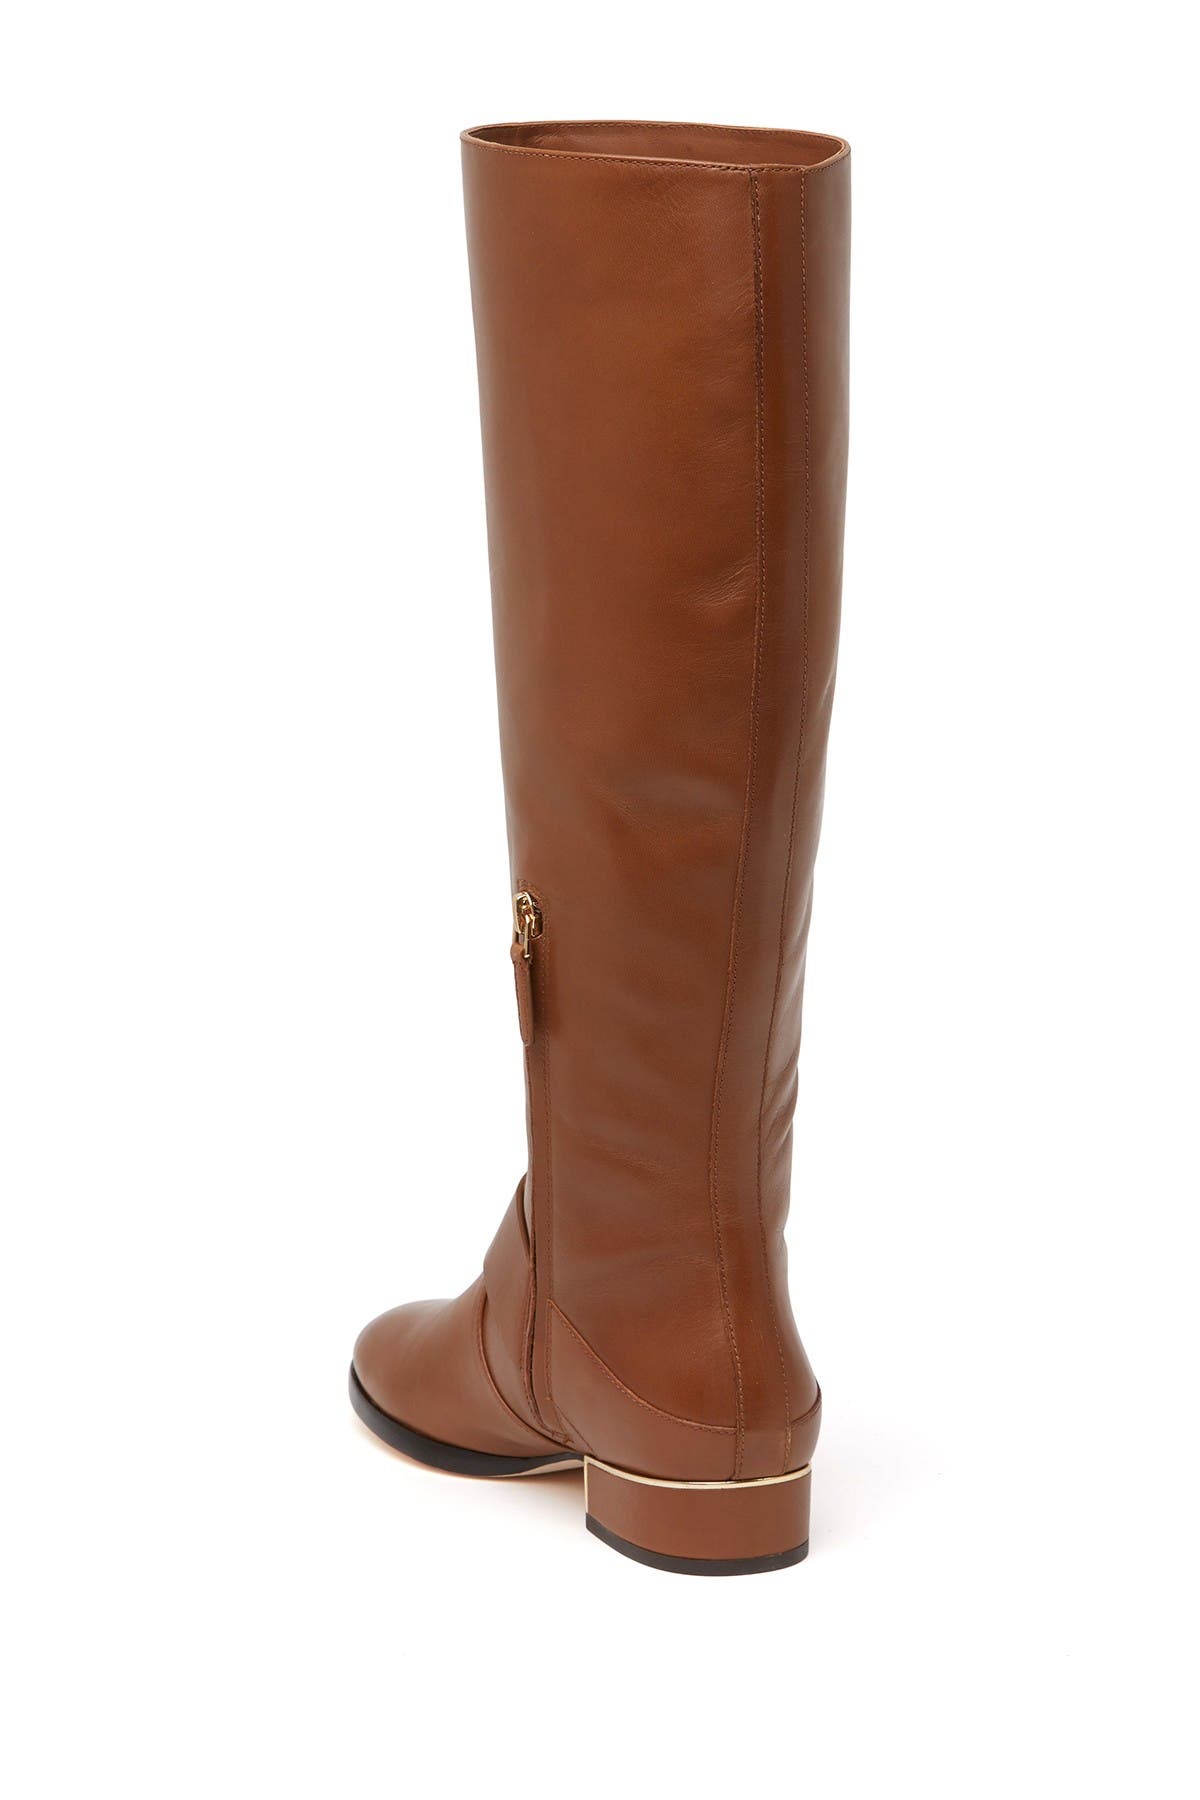 Tory Burch | Sofia Buckled Riding Boot 